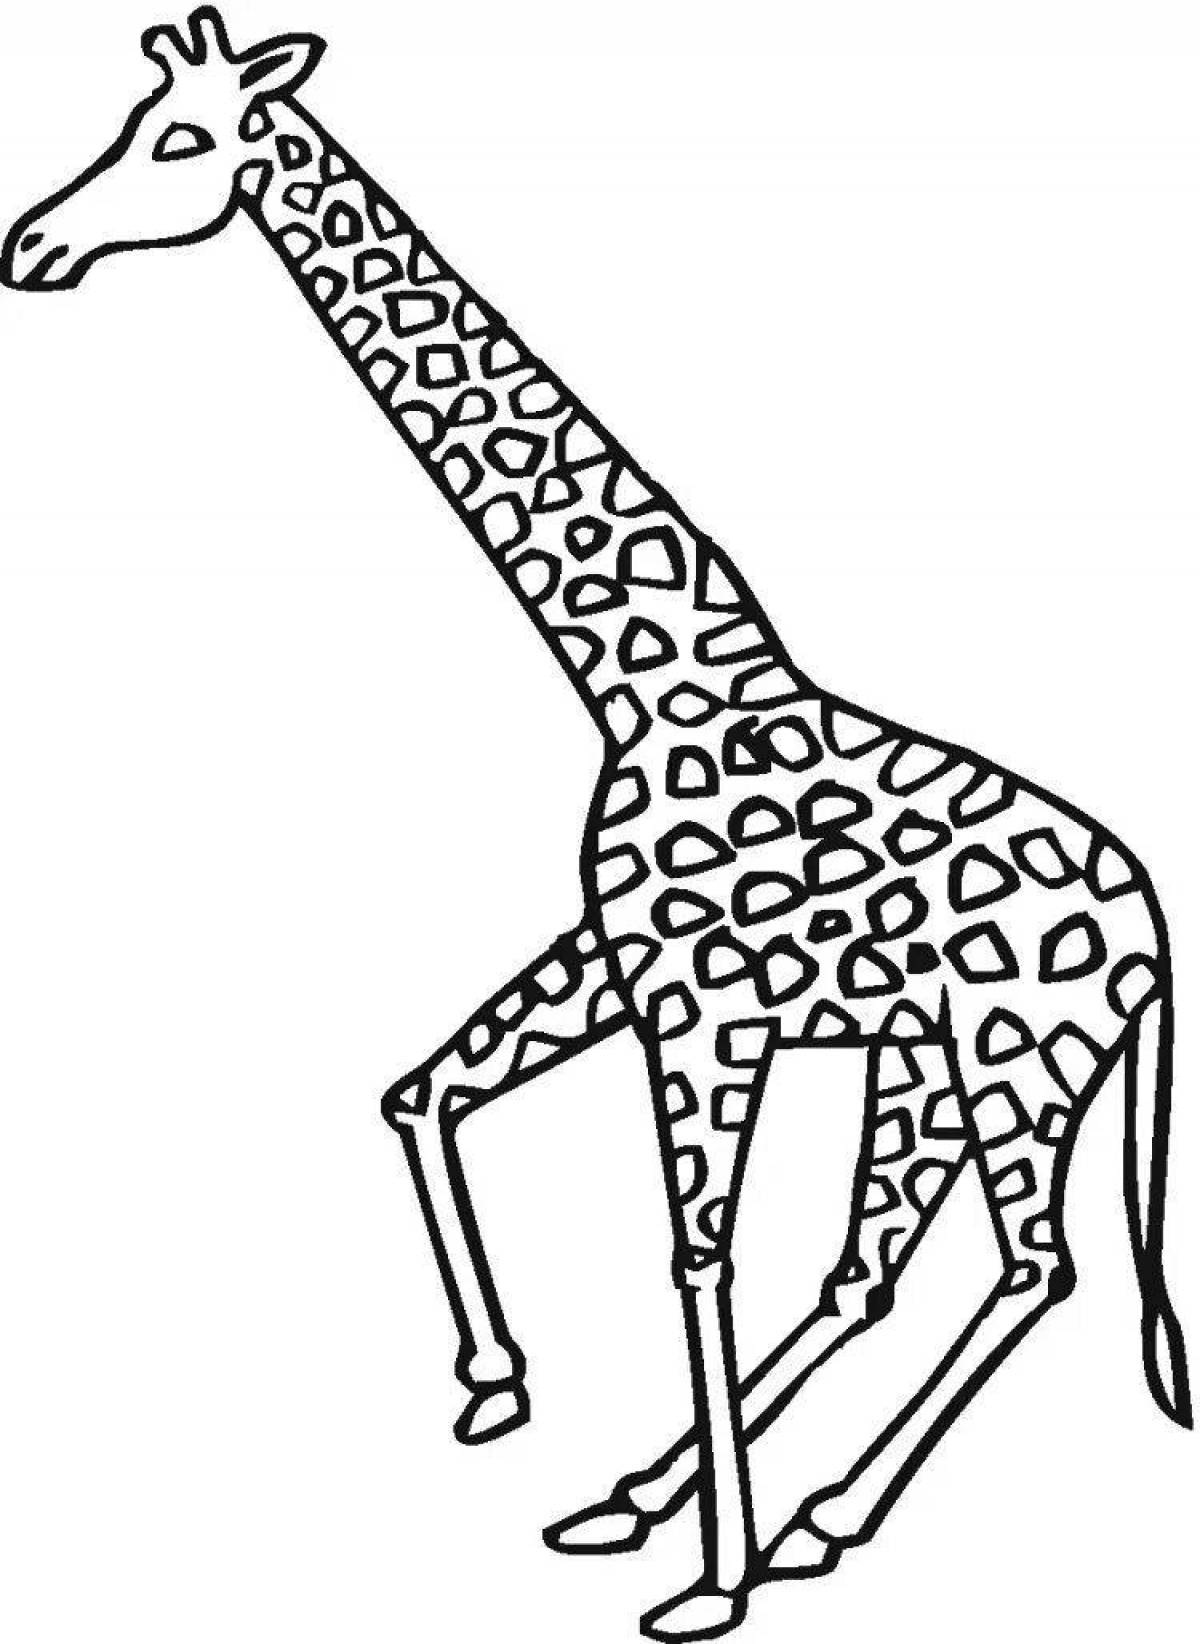 Cute giraffe coloring pages for kids